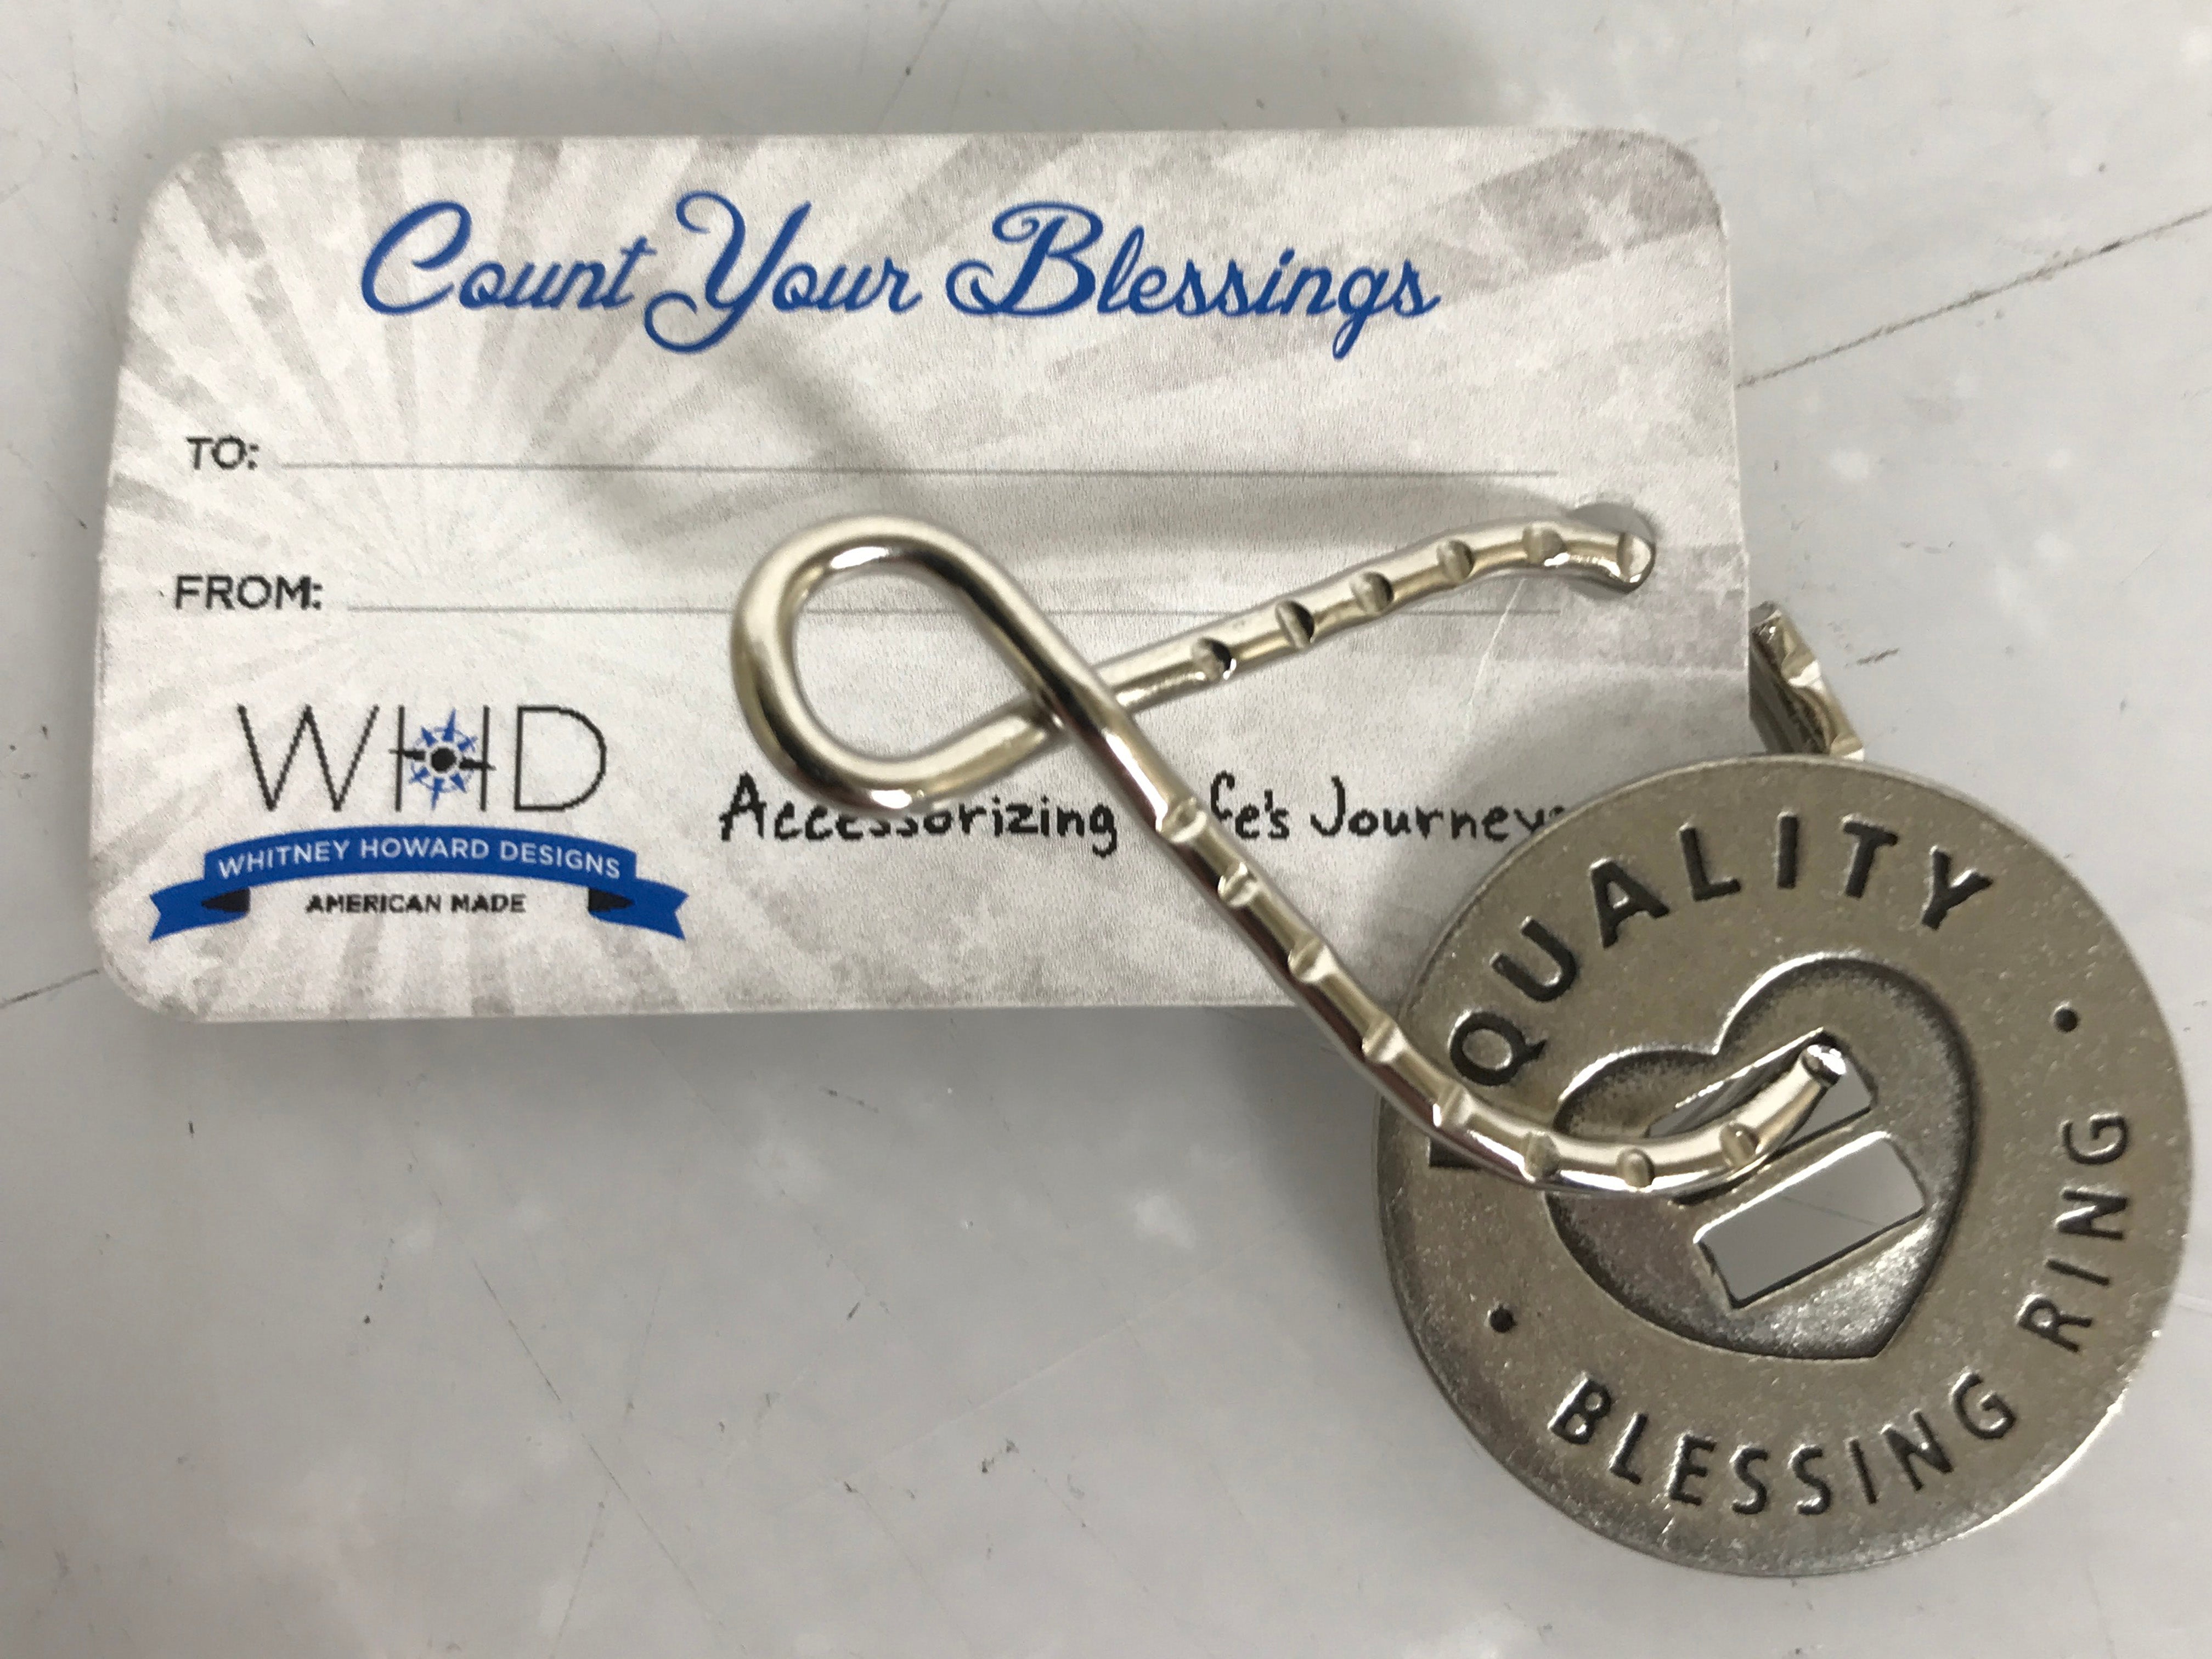 WHD BlessingRings "Equality" Keychain